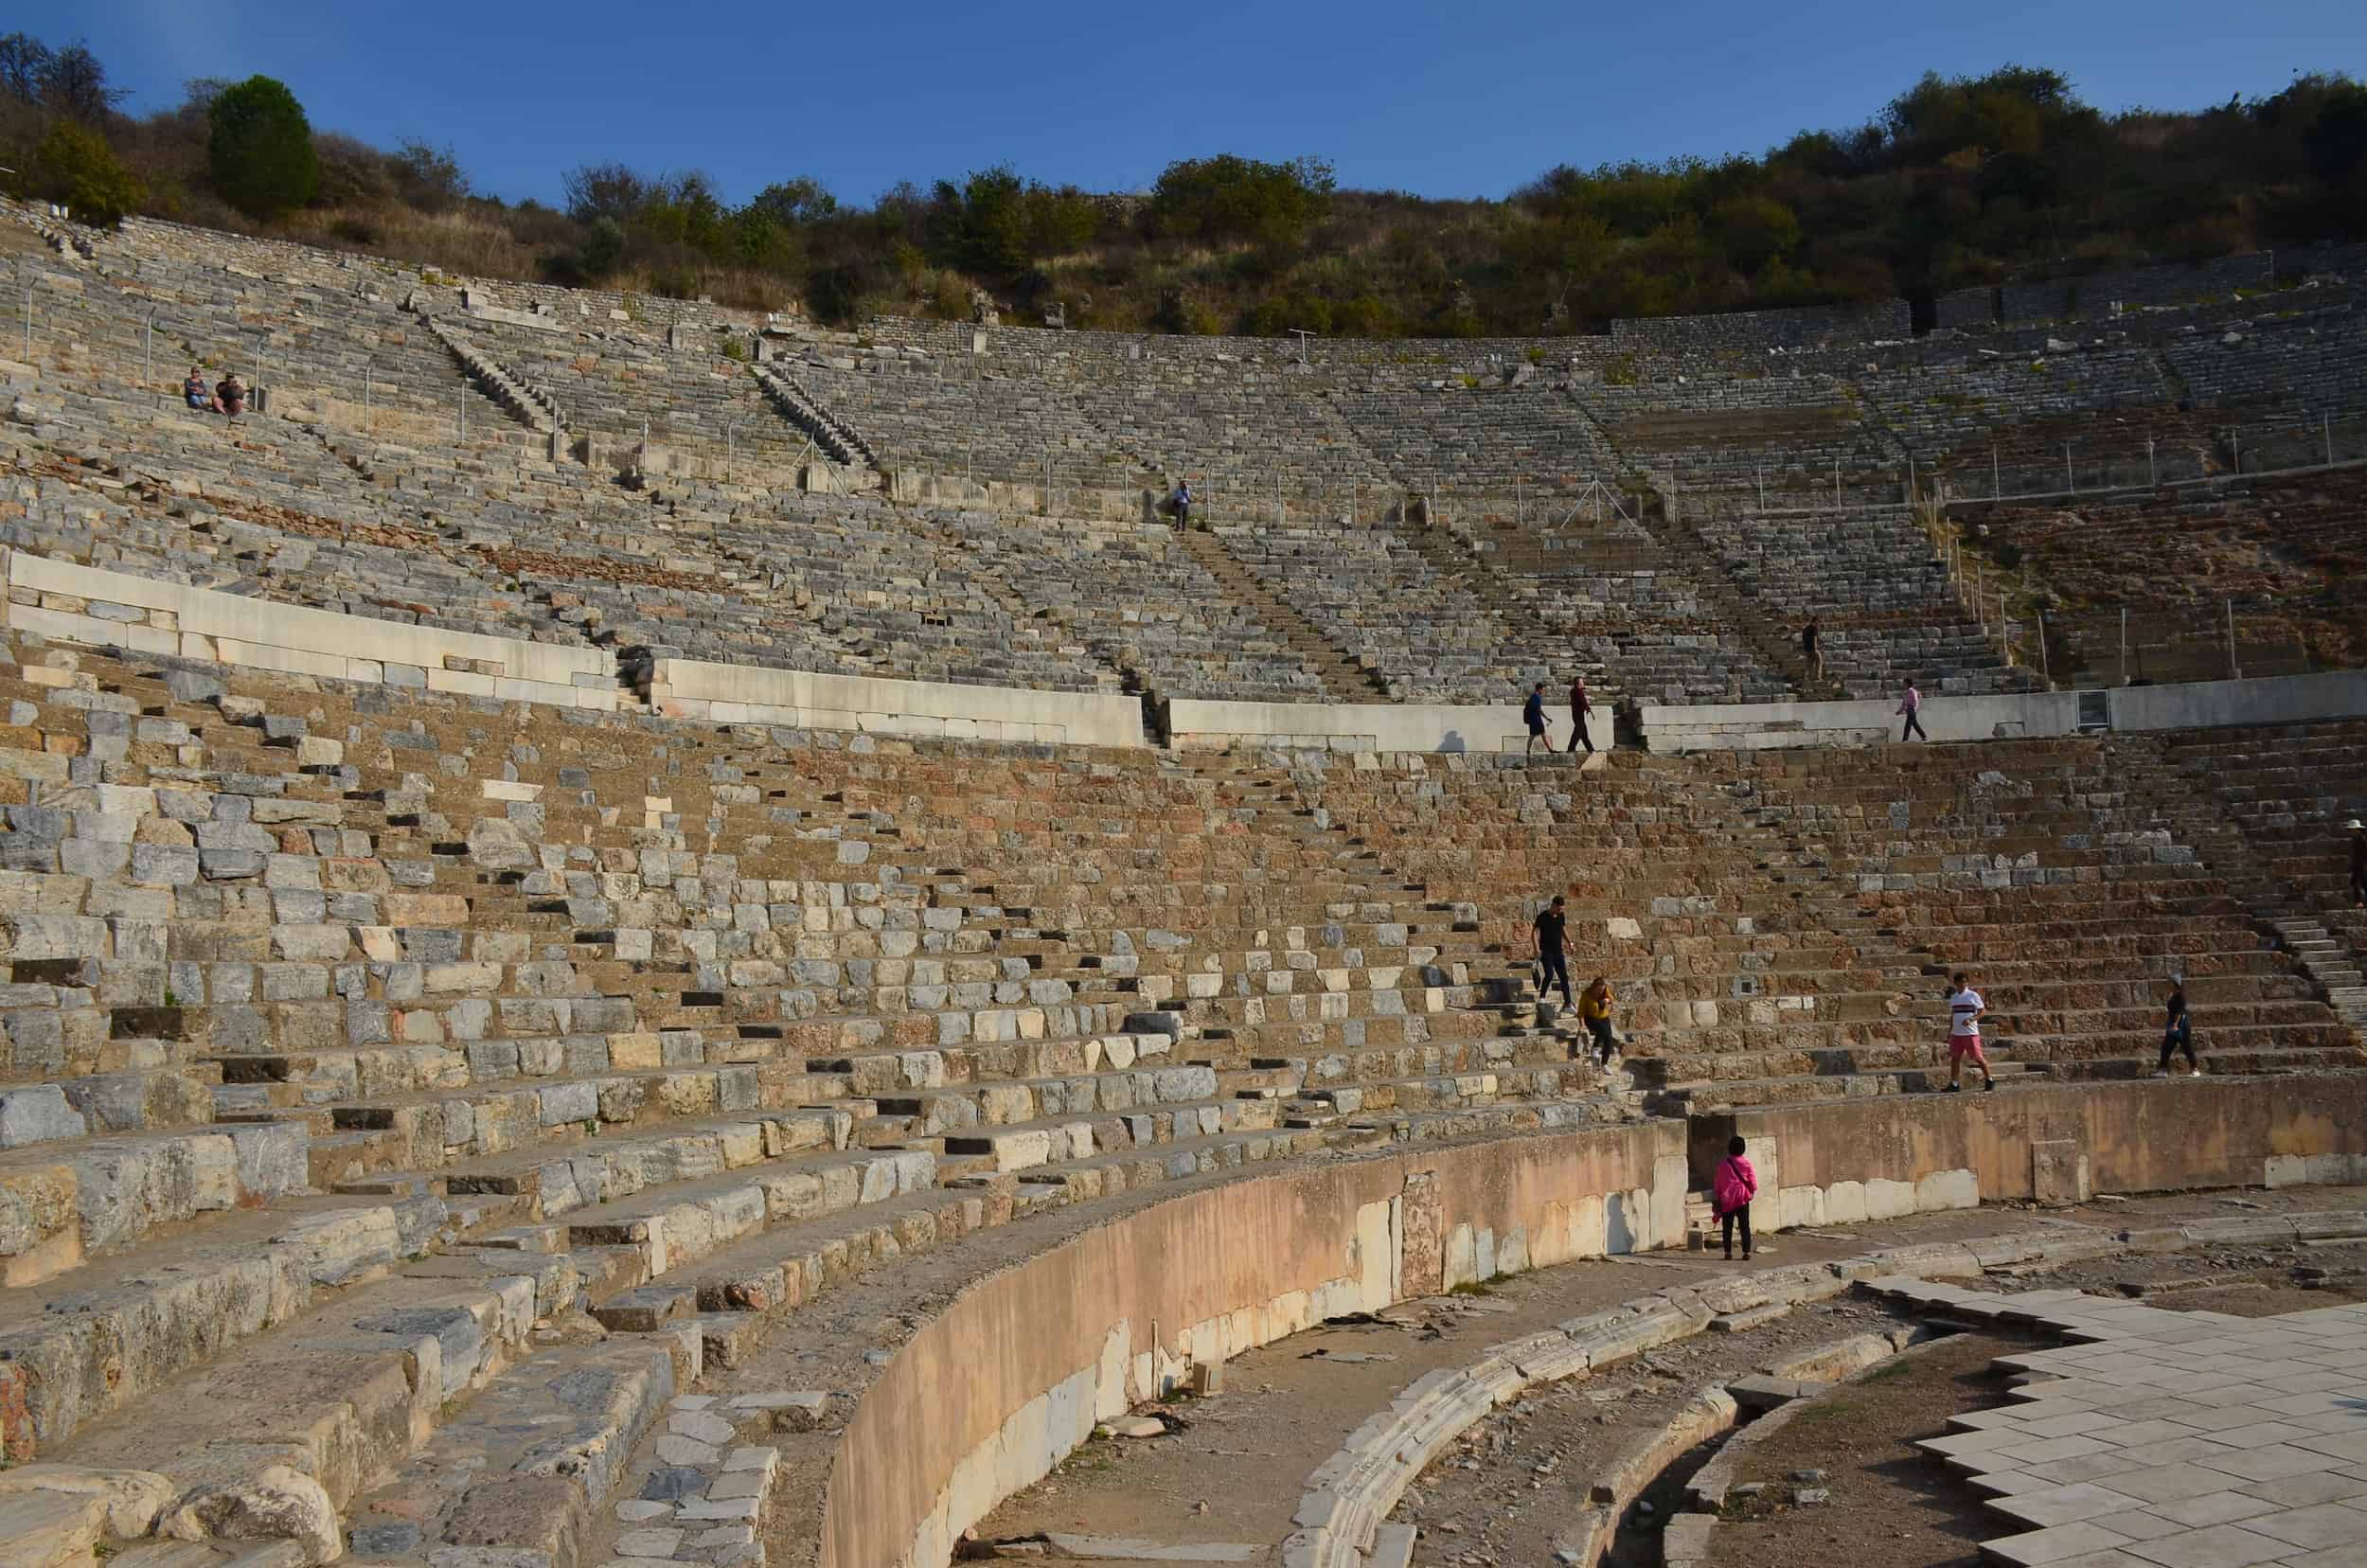 Seating area at the Great Theatre of Ephesus